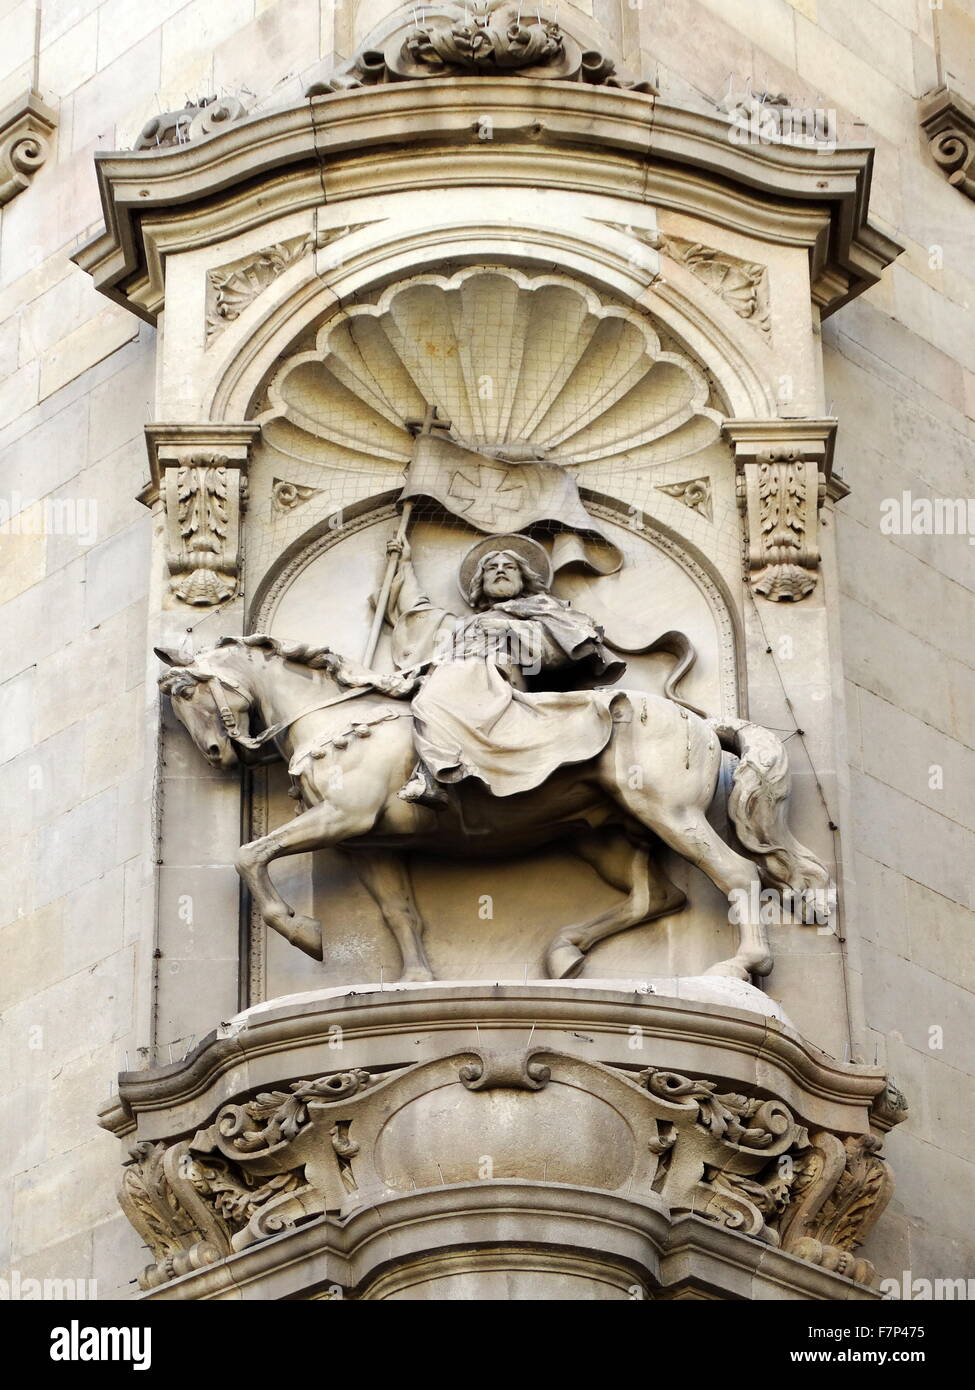 Christ the Saviour adorns a Building in the Gothic Quarter of Barcelona, Spain Stock Photo